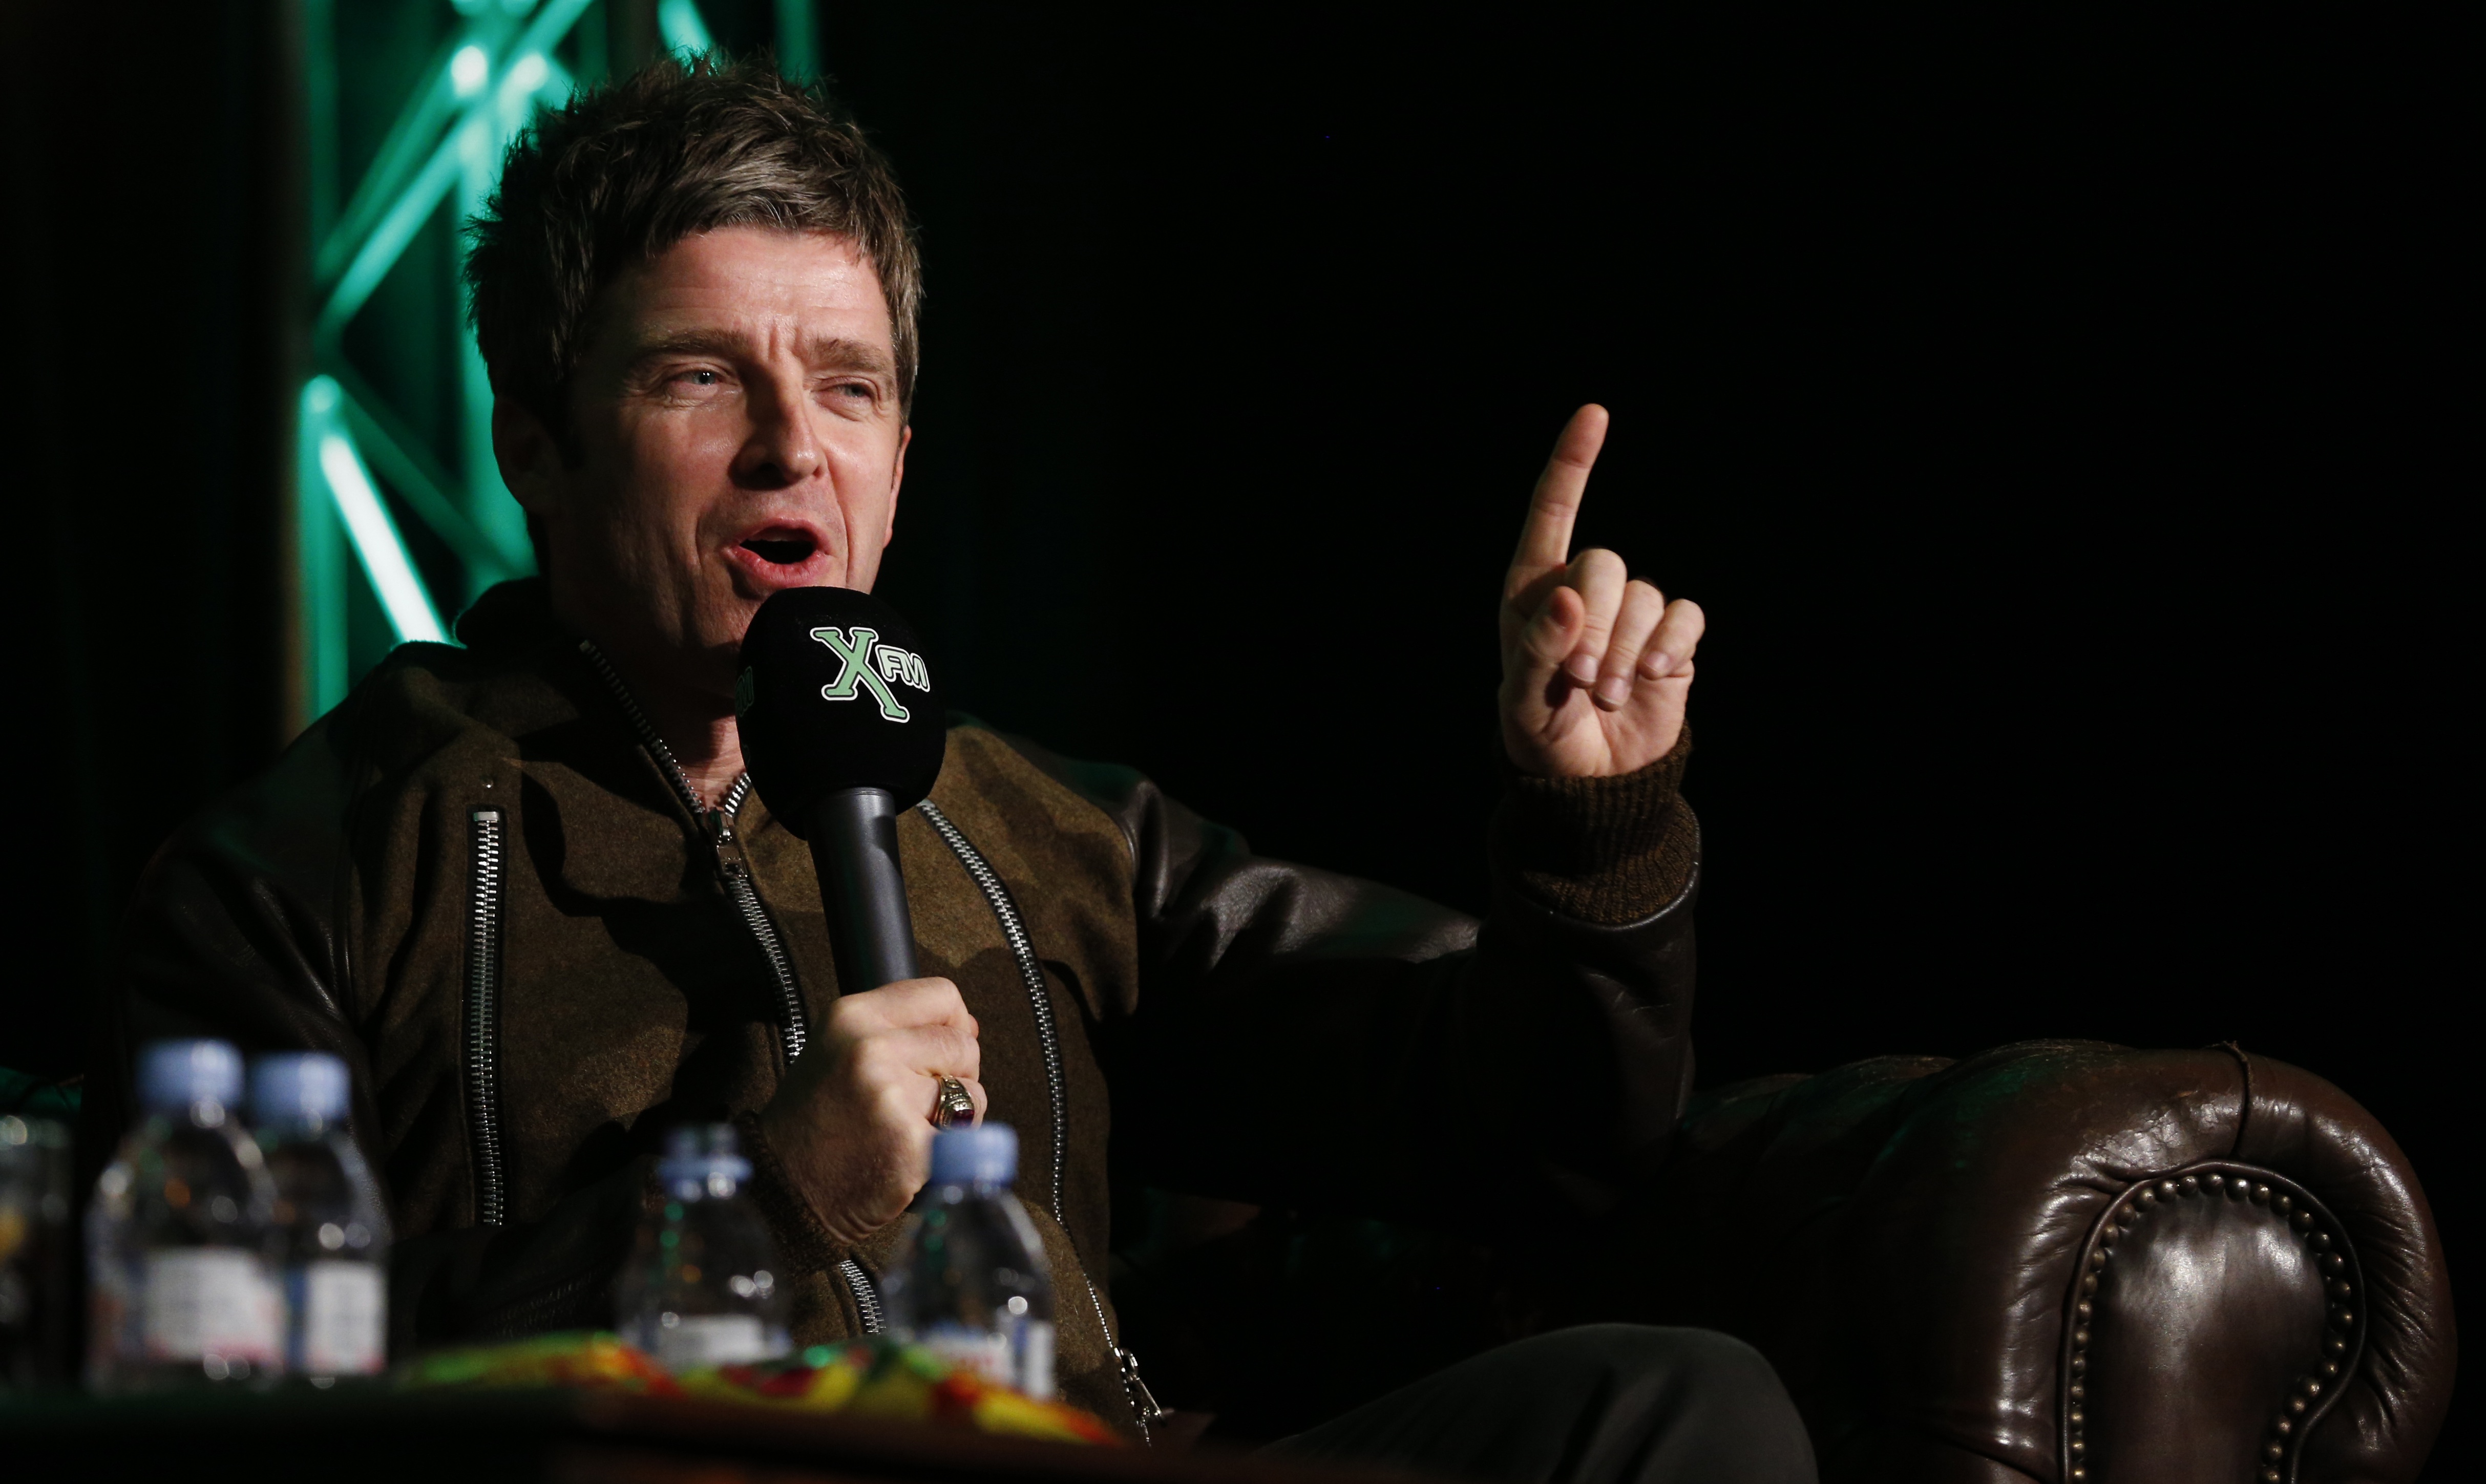 An Evening in Conversation with Noel Gallagher